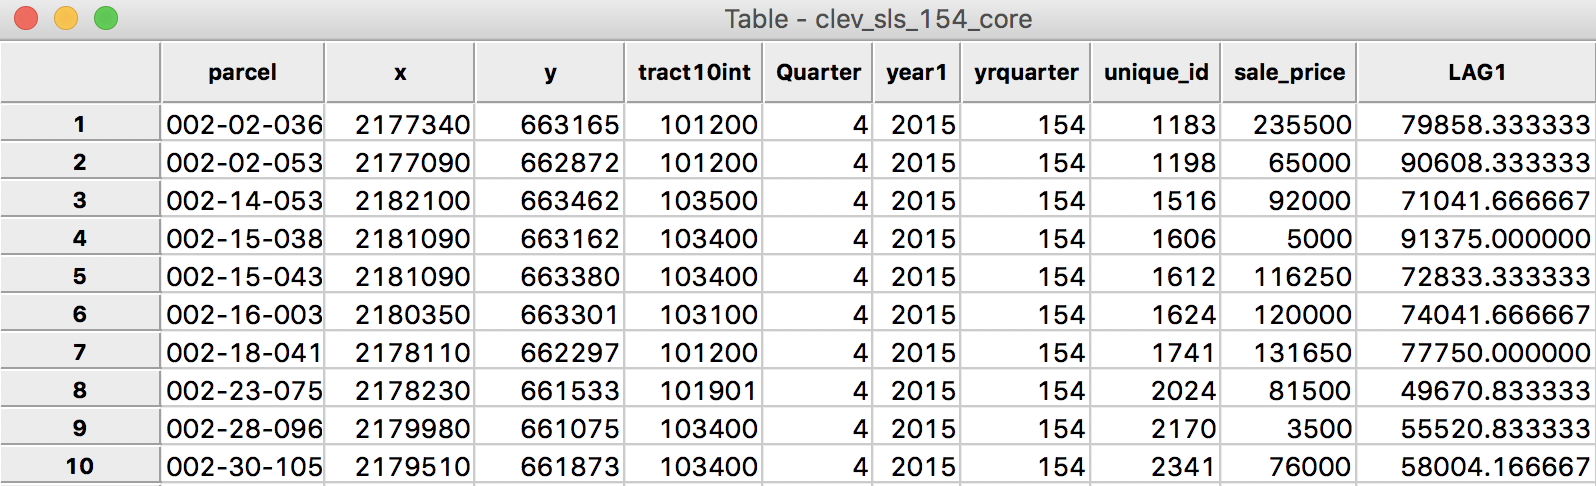 Spatial Lag for sales price in table